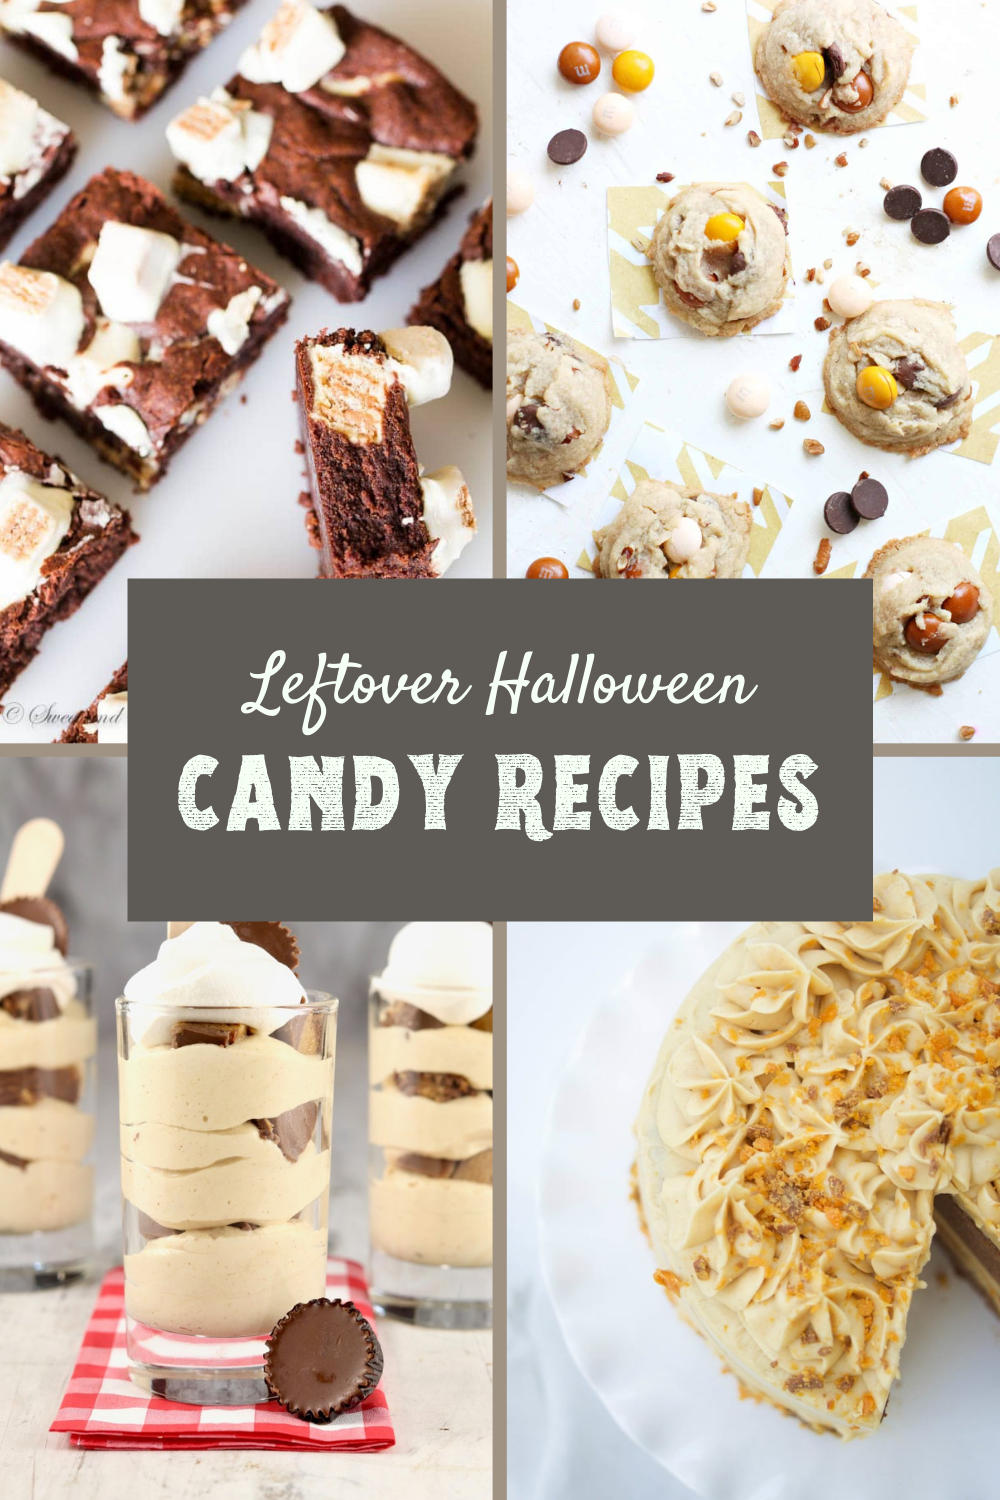 Keep the fun going past the 31st with these delicious and decadent recipes to use up that leftover Halloween Candy!